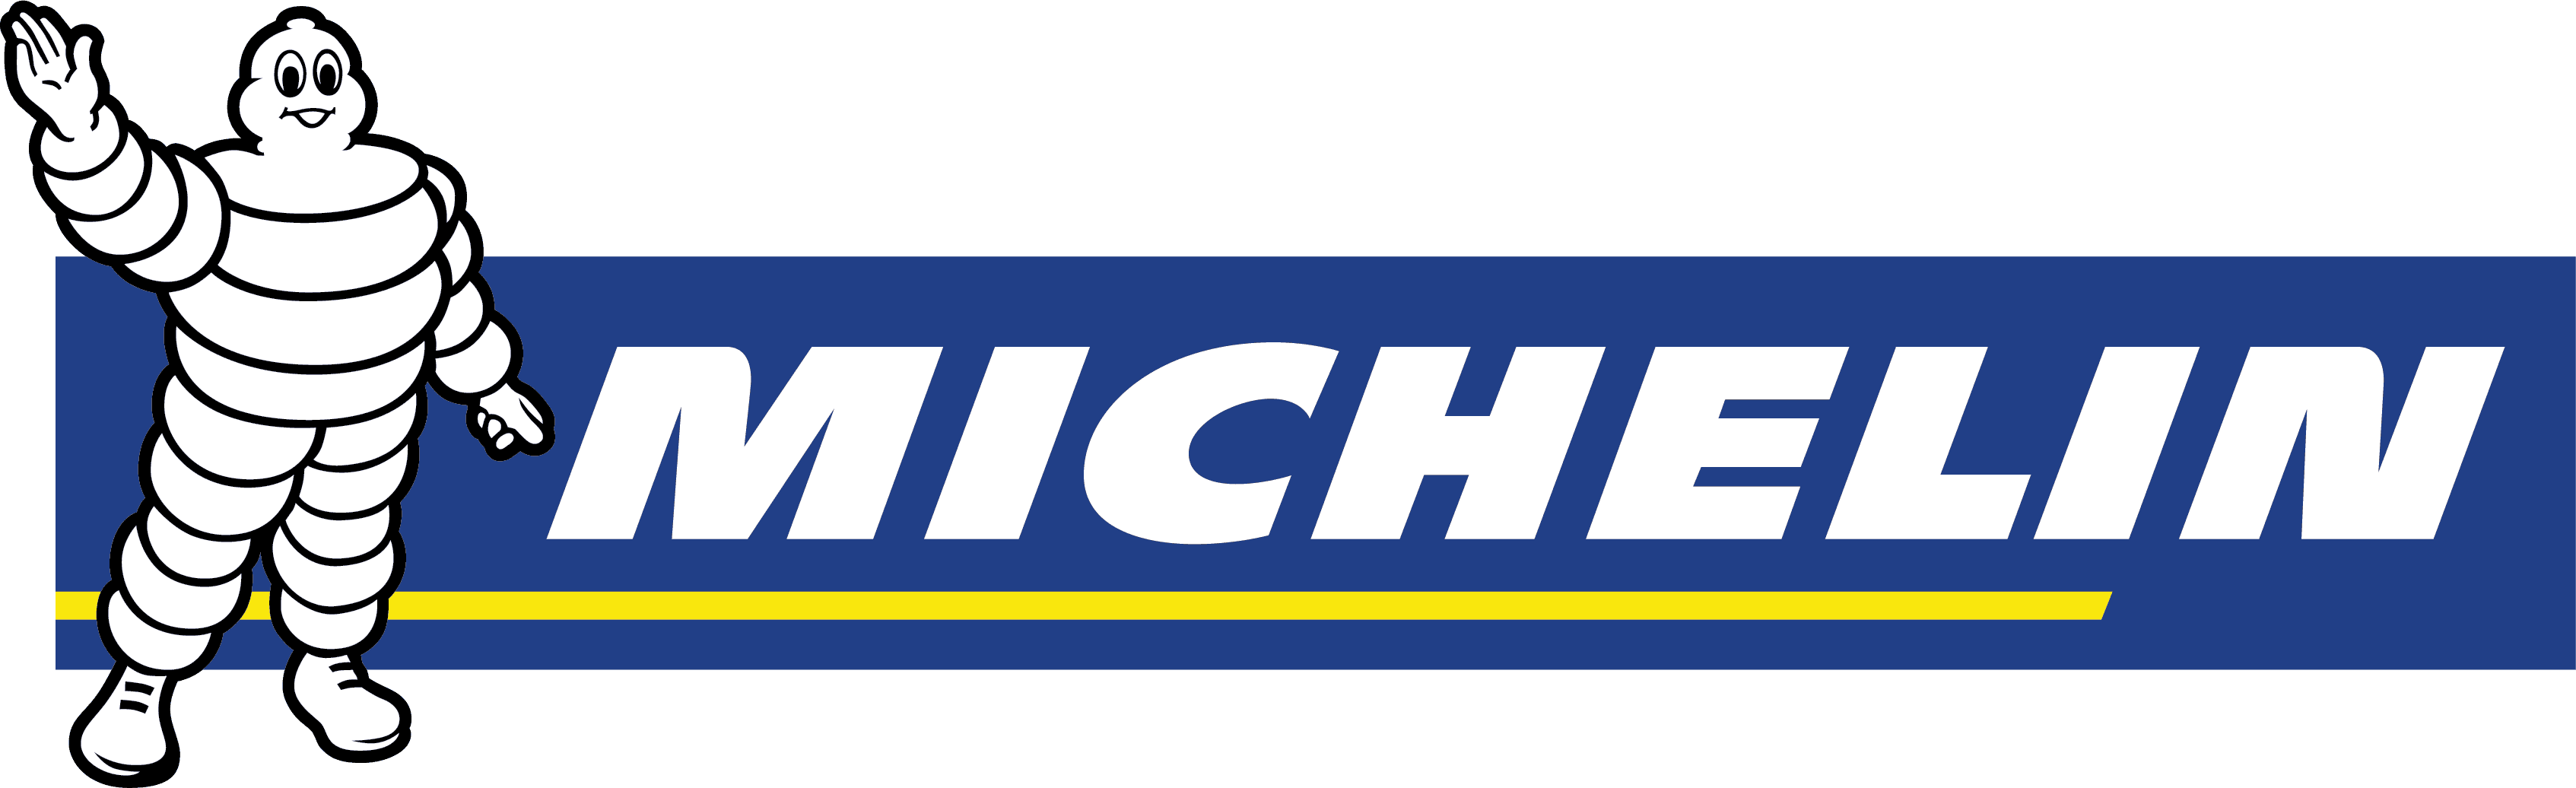 https://clubeabtyres.pt/wp-content/uploads/2020/01/michelin-1.png